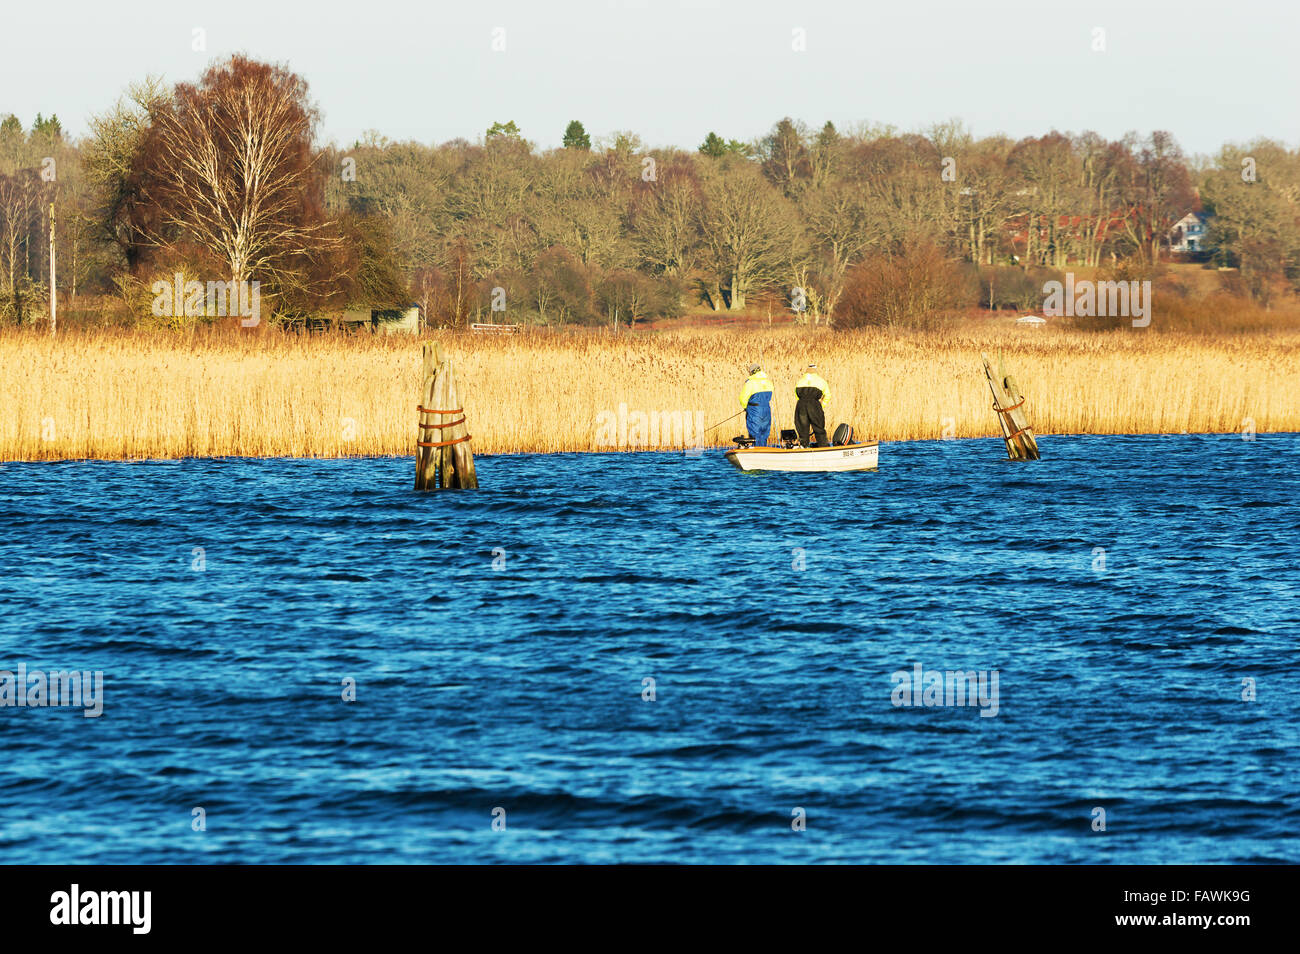 Ronneby, Sweden - December 30, 2015: Two persons fishing from a small open boat in late December. Sweden had very high average t Stock Photo